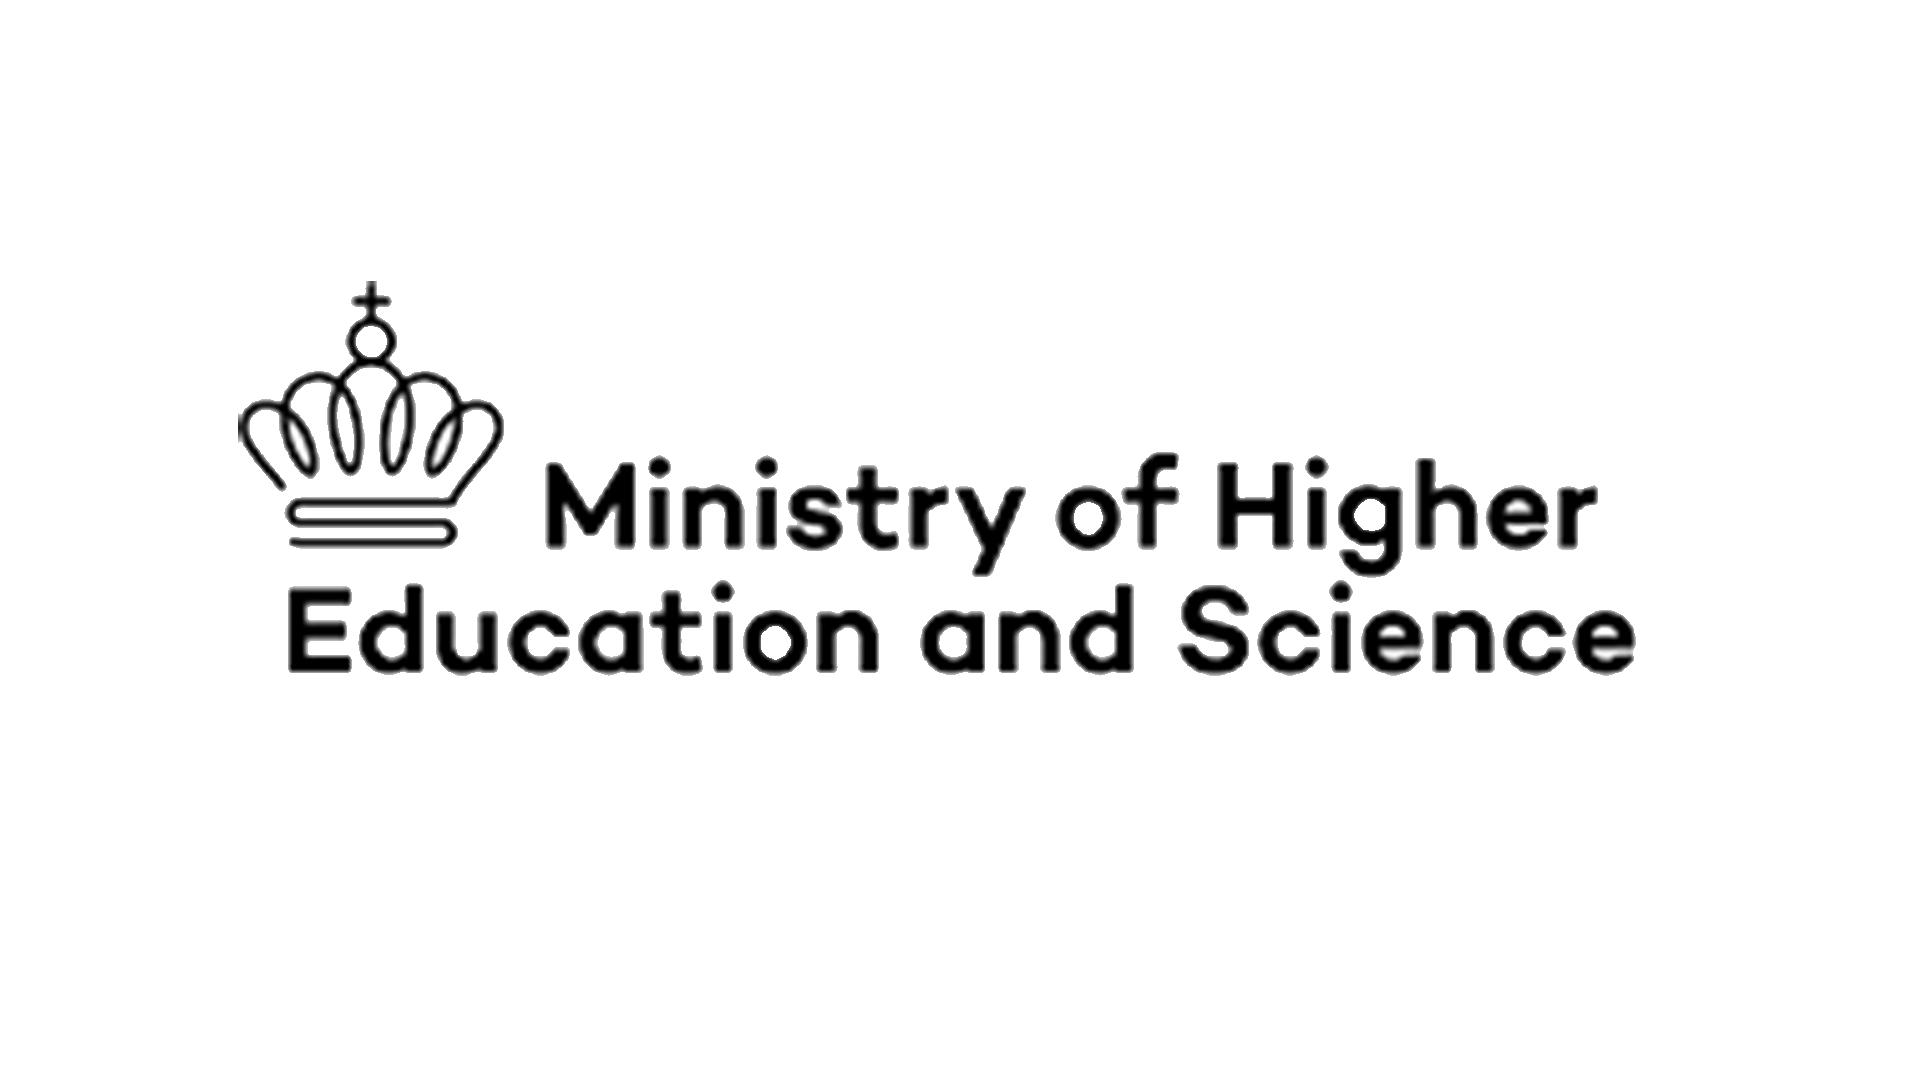 Ministry of Higher Education and Science logo